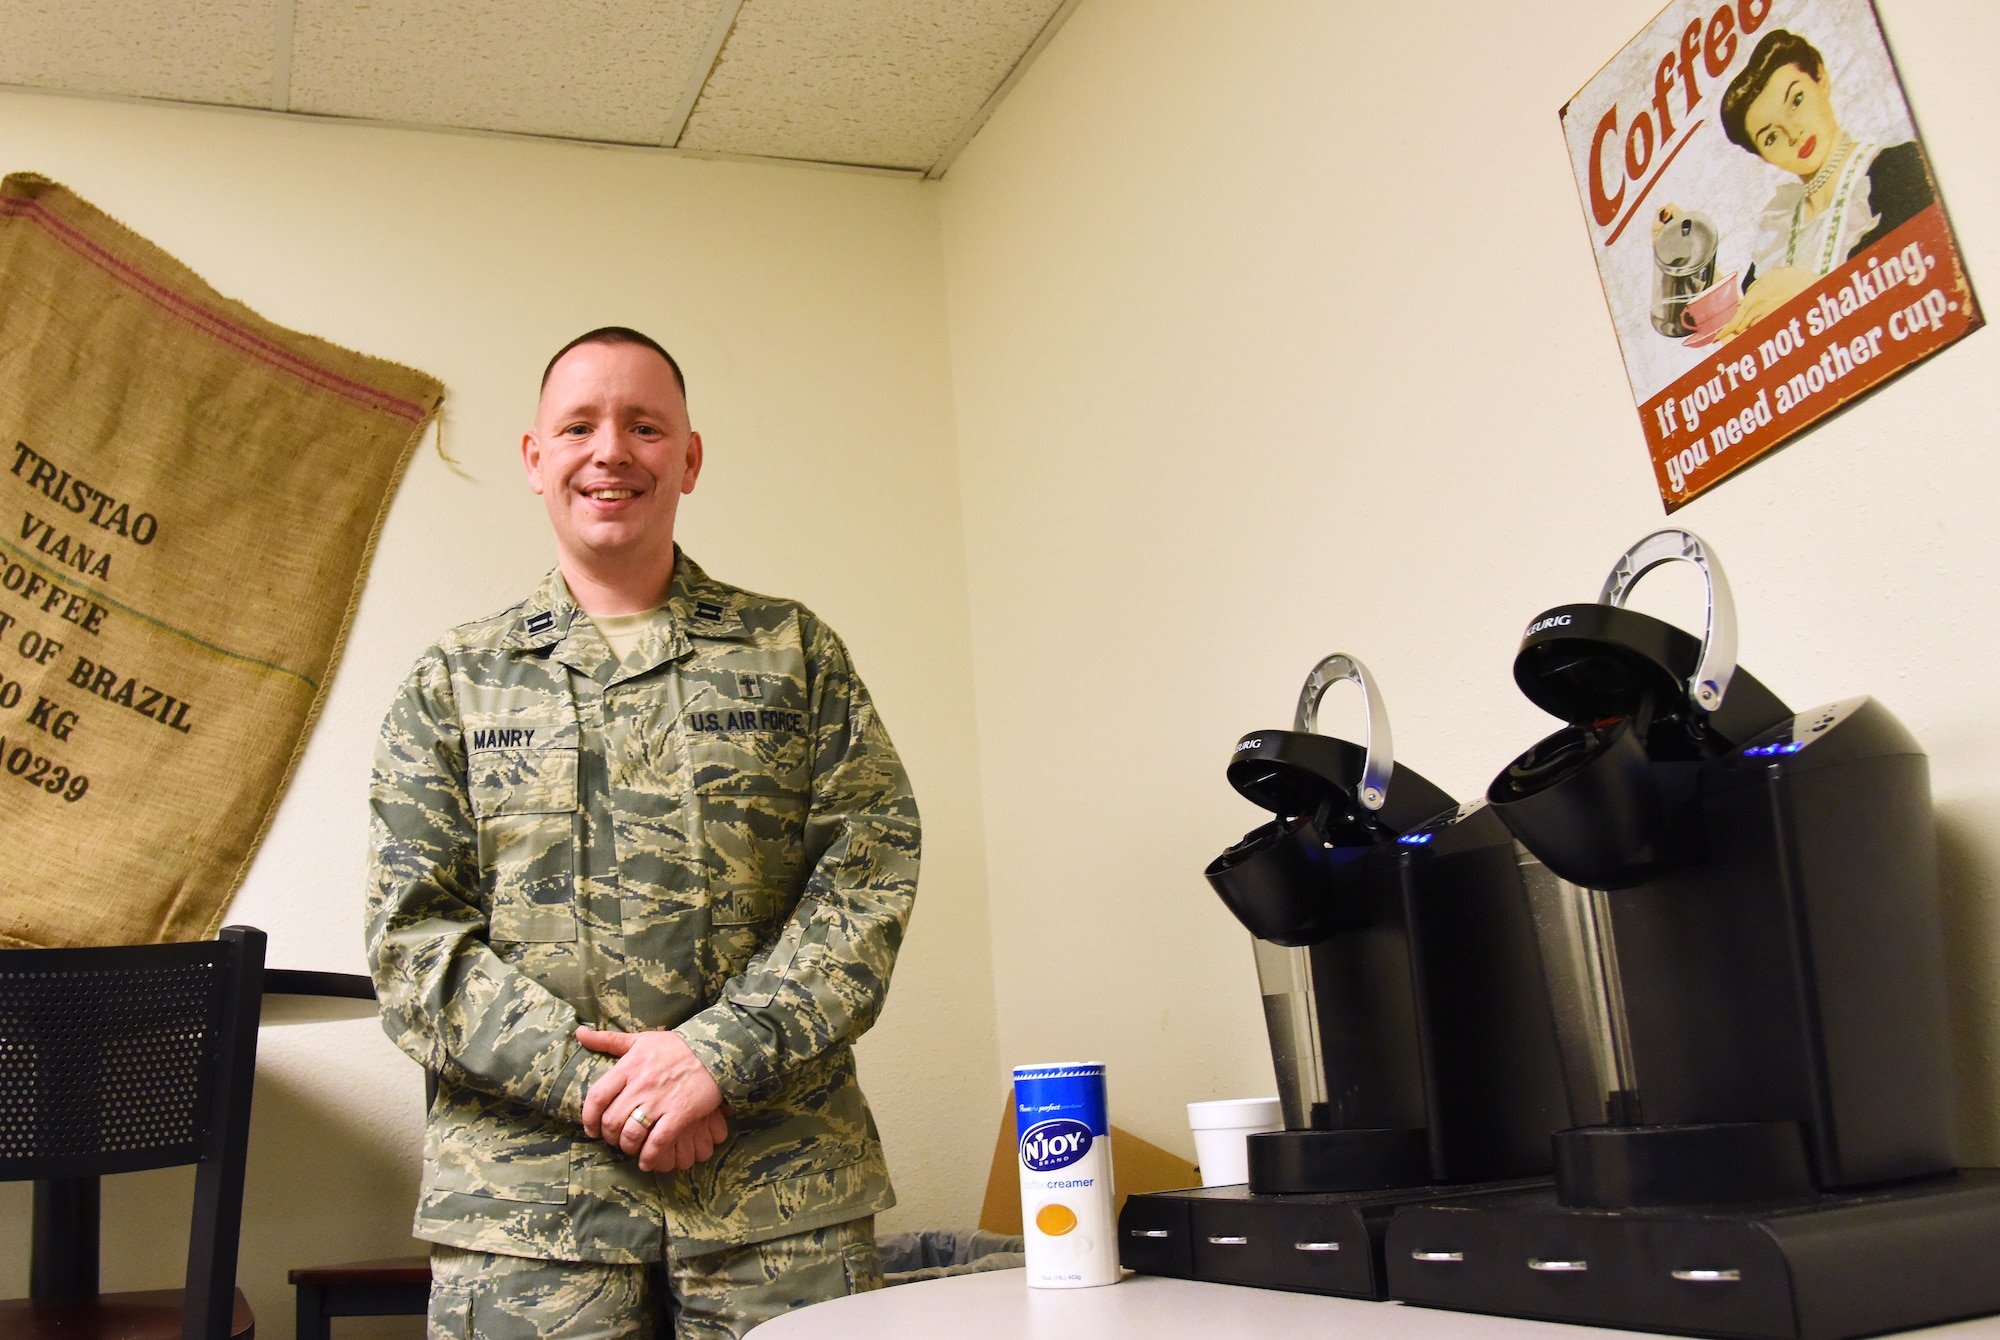 Chaplain (Capt.) Keith Manry, 341st Missile Wing chaplain for the security forces group, stands next to two, brand-new coffee machines in the recently opened Holy Joe’s Café in Bldg. 500 on Nov. 19. Holy Joe’s was implemented to provide an oasis for defenders to visit before and after posting to the missile field, the weapons storage area or base side. (U.S. Air Force photo/ Airman 1st Class Collin Schmidt)